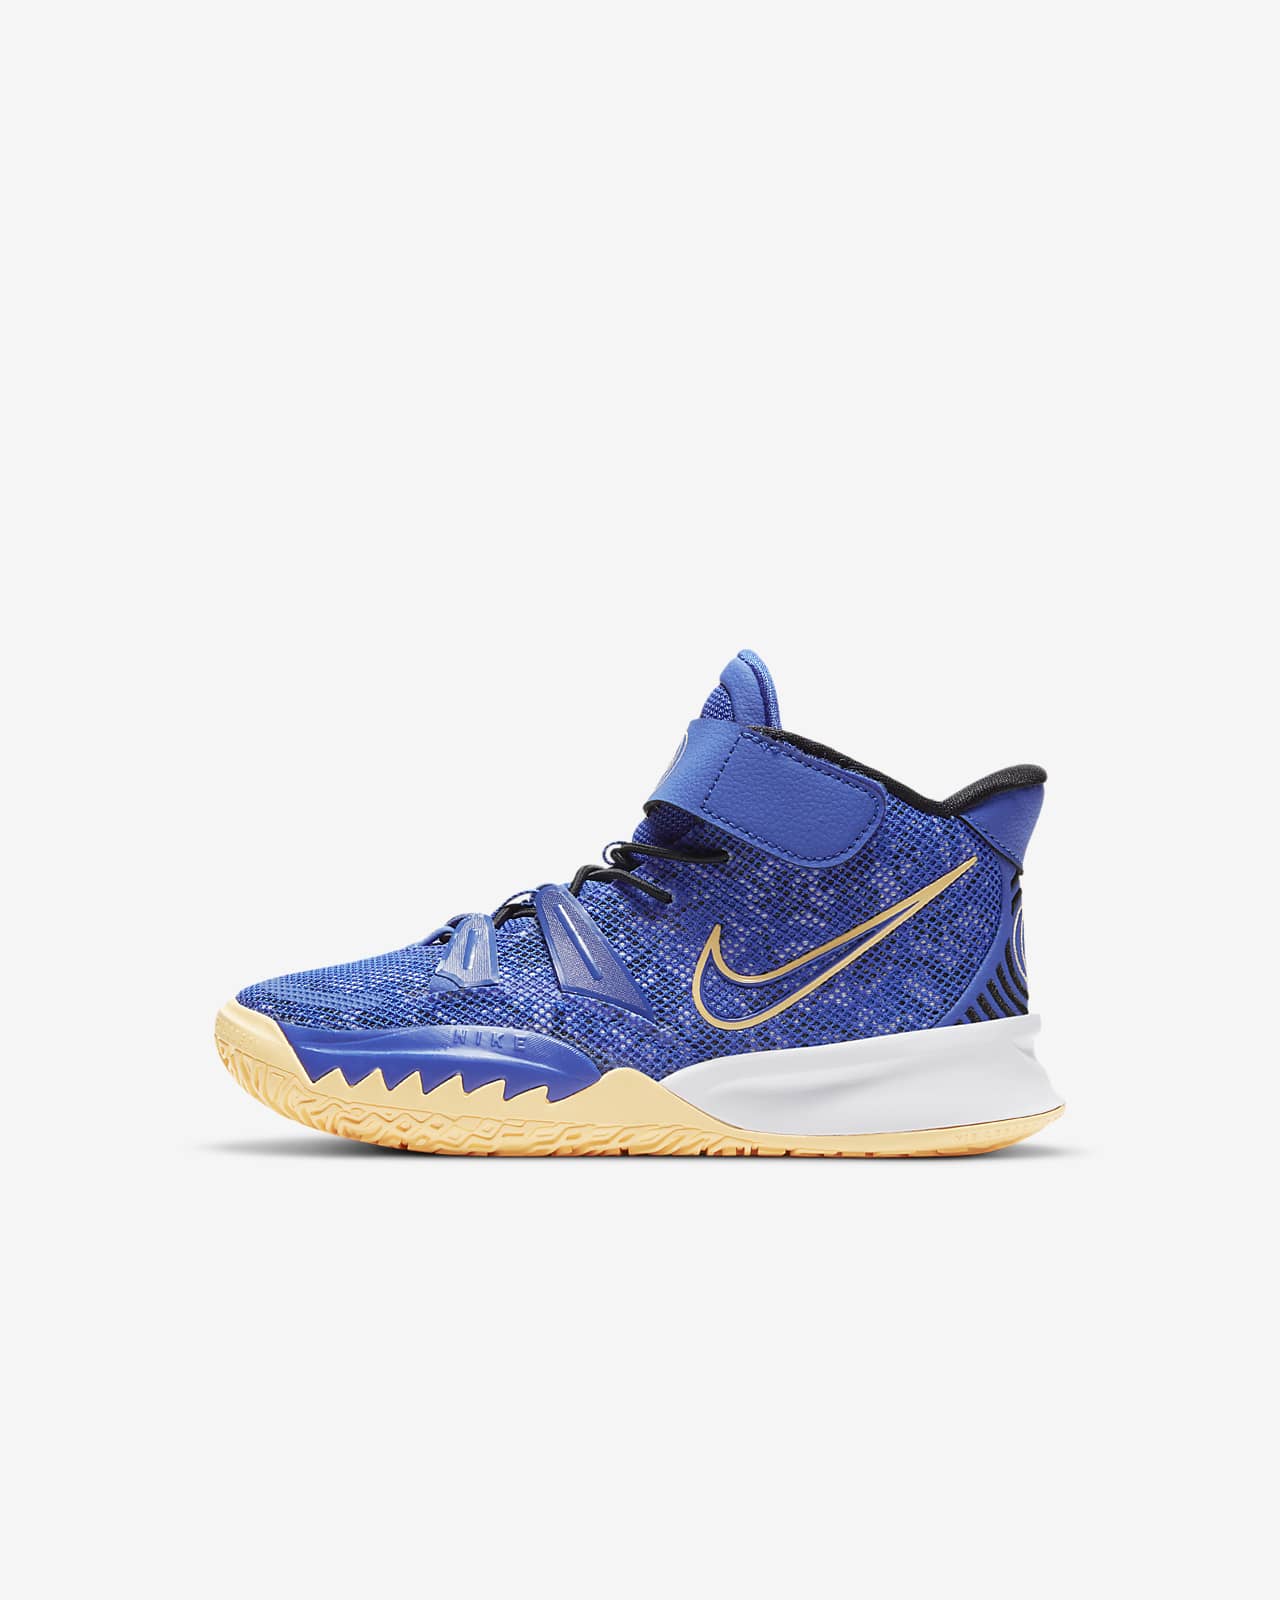 Kyrie 7 Younger Kids' Shoe. Nike PH